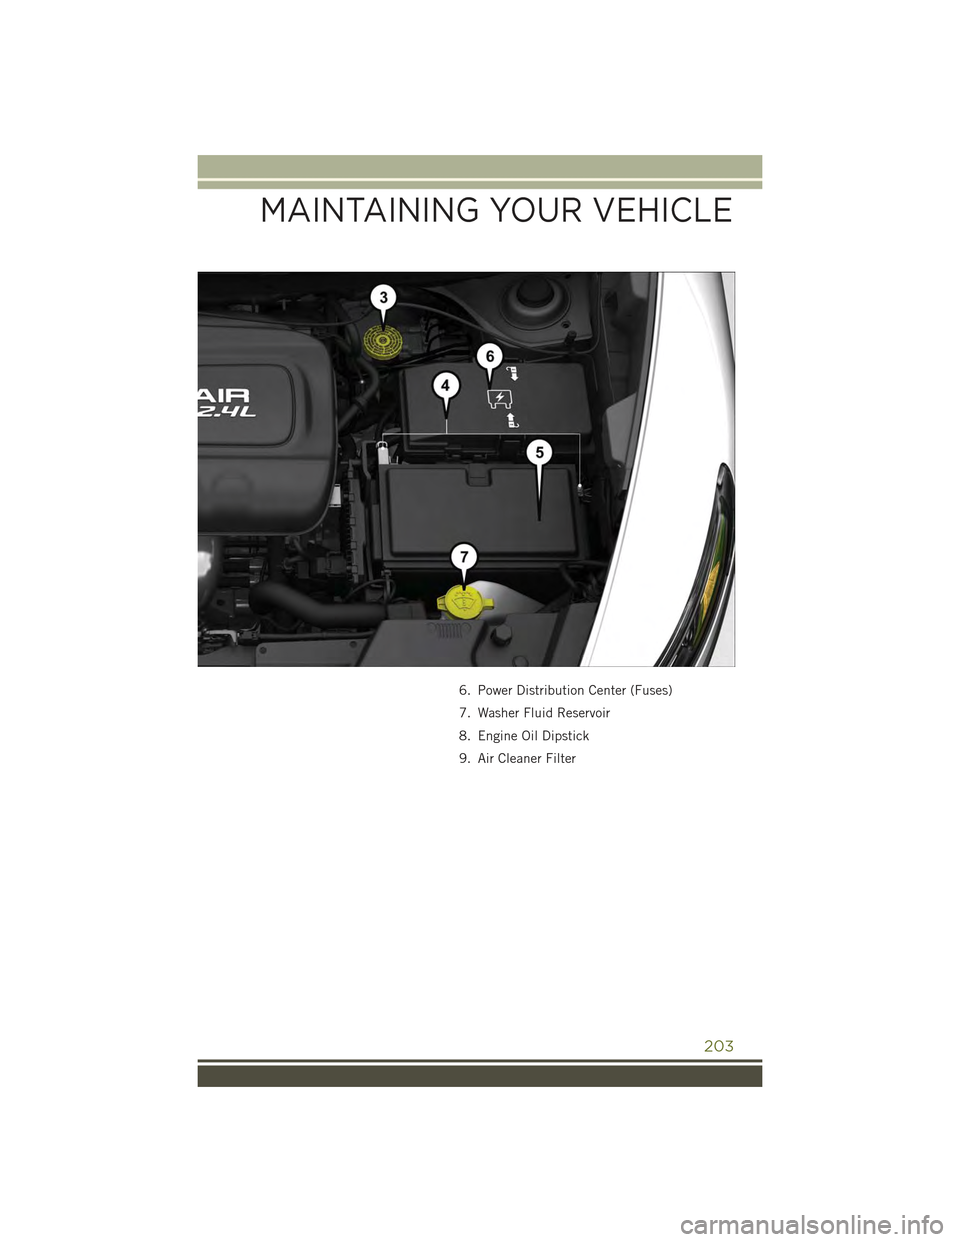 JEEP CHEROKEE 2015 KL / 5.G User Guide 6. Power Distribution Center (Fuses)
7. Washer Fluid Reservoir
8. Engine Oil Dipstick
9. Air Cleaner Filter
MAINTAINING YOUR VEHICLE
203 